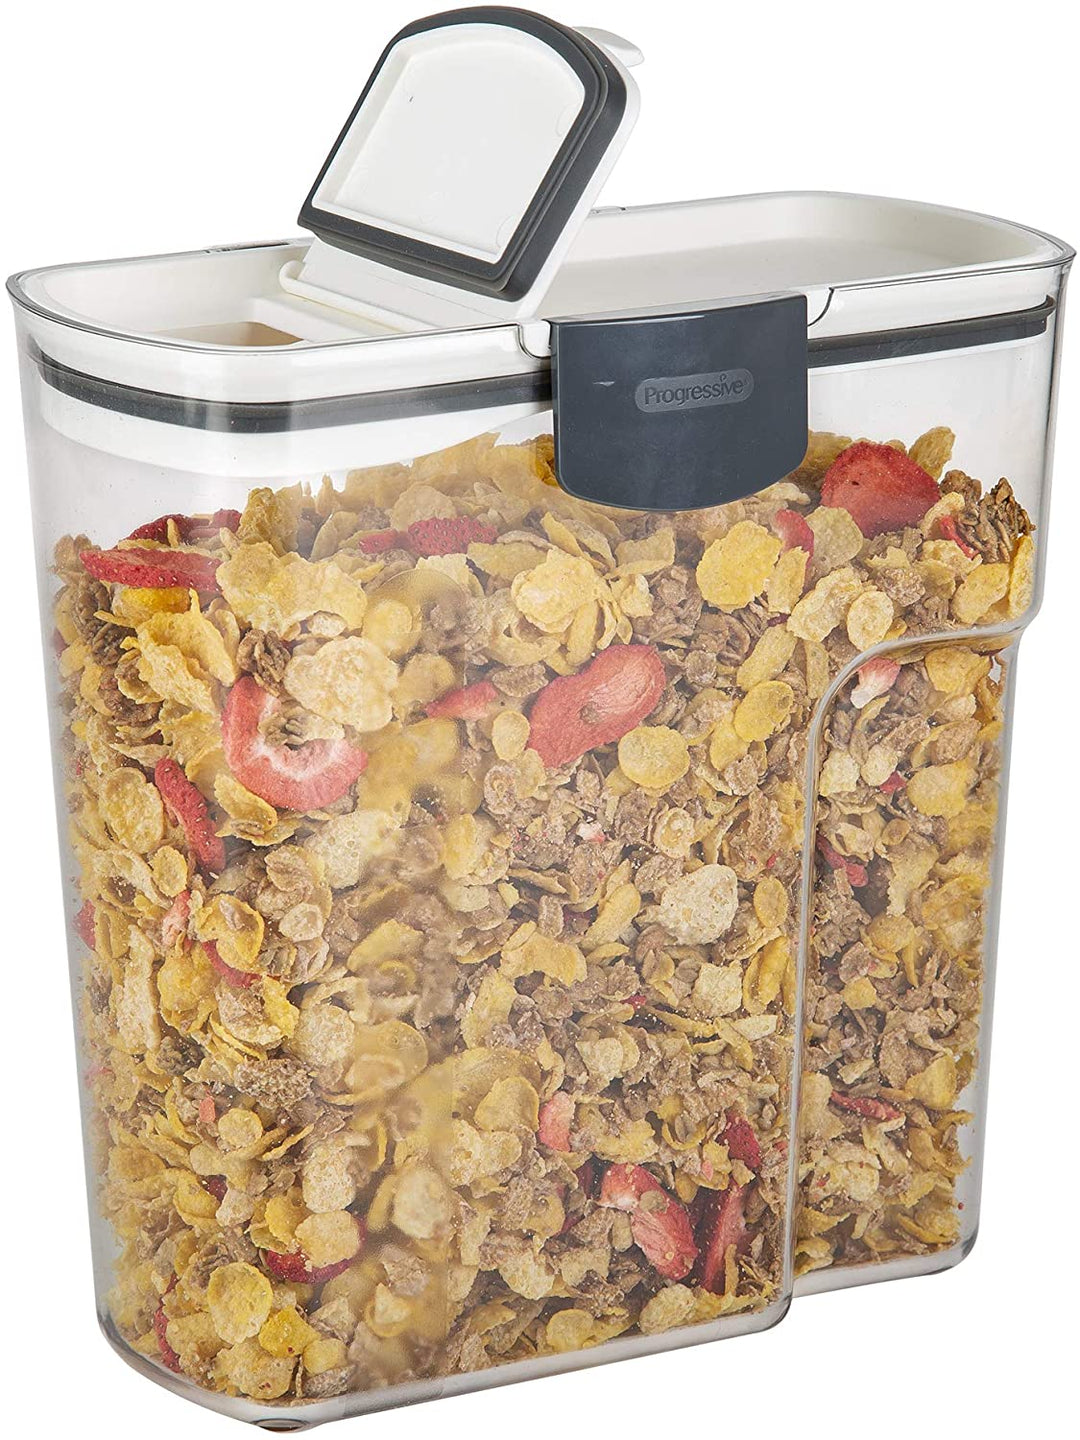 Progressive ProKeeper Plus Large Cereal Container